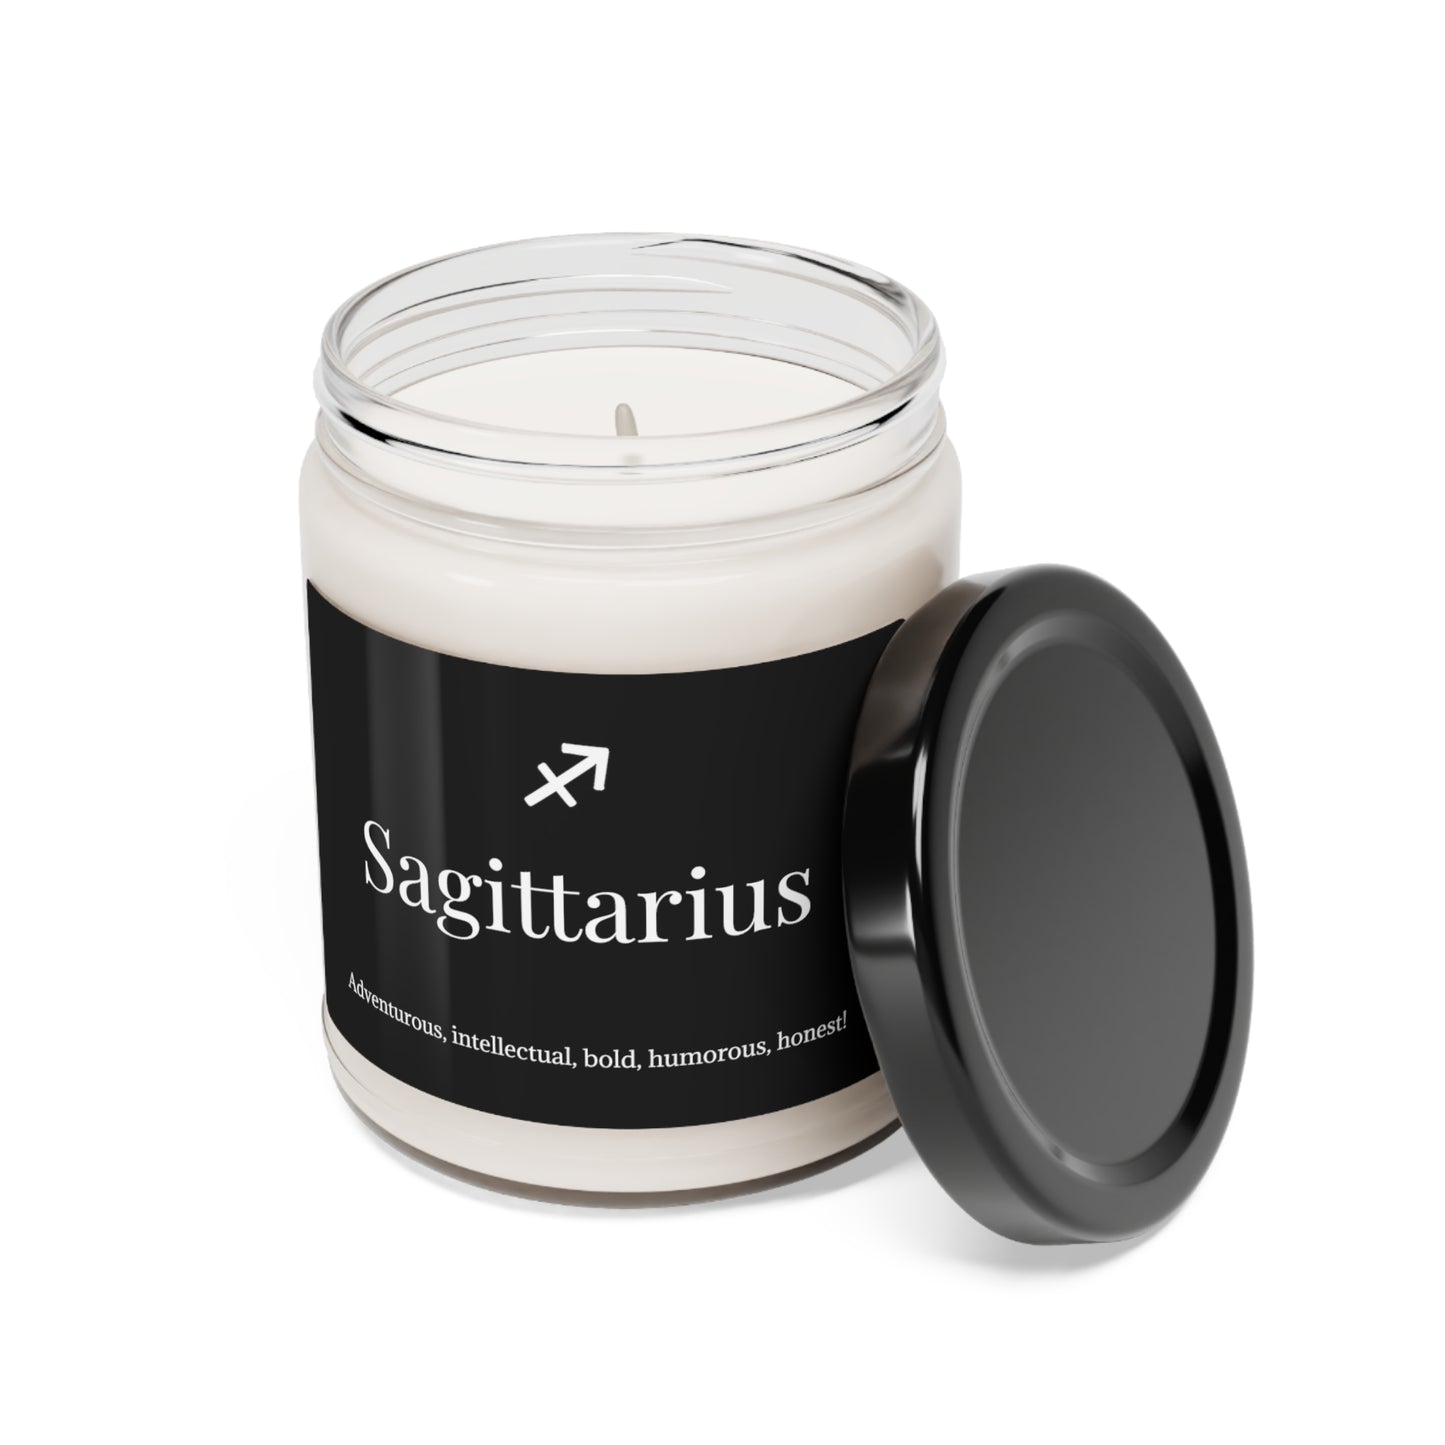 Sagittarius Scented Soy Candle